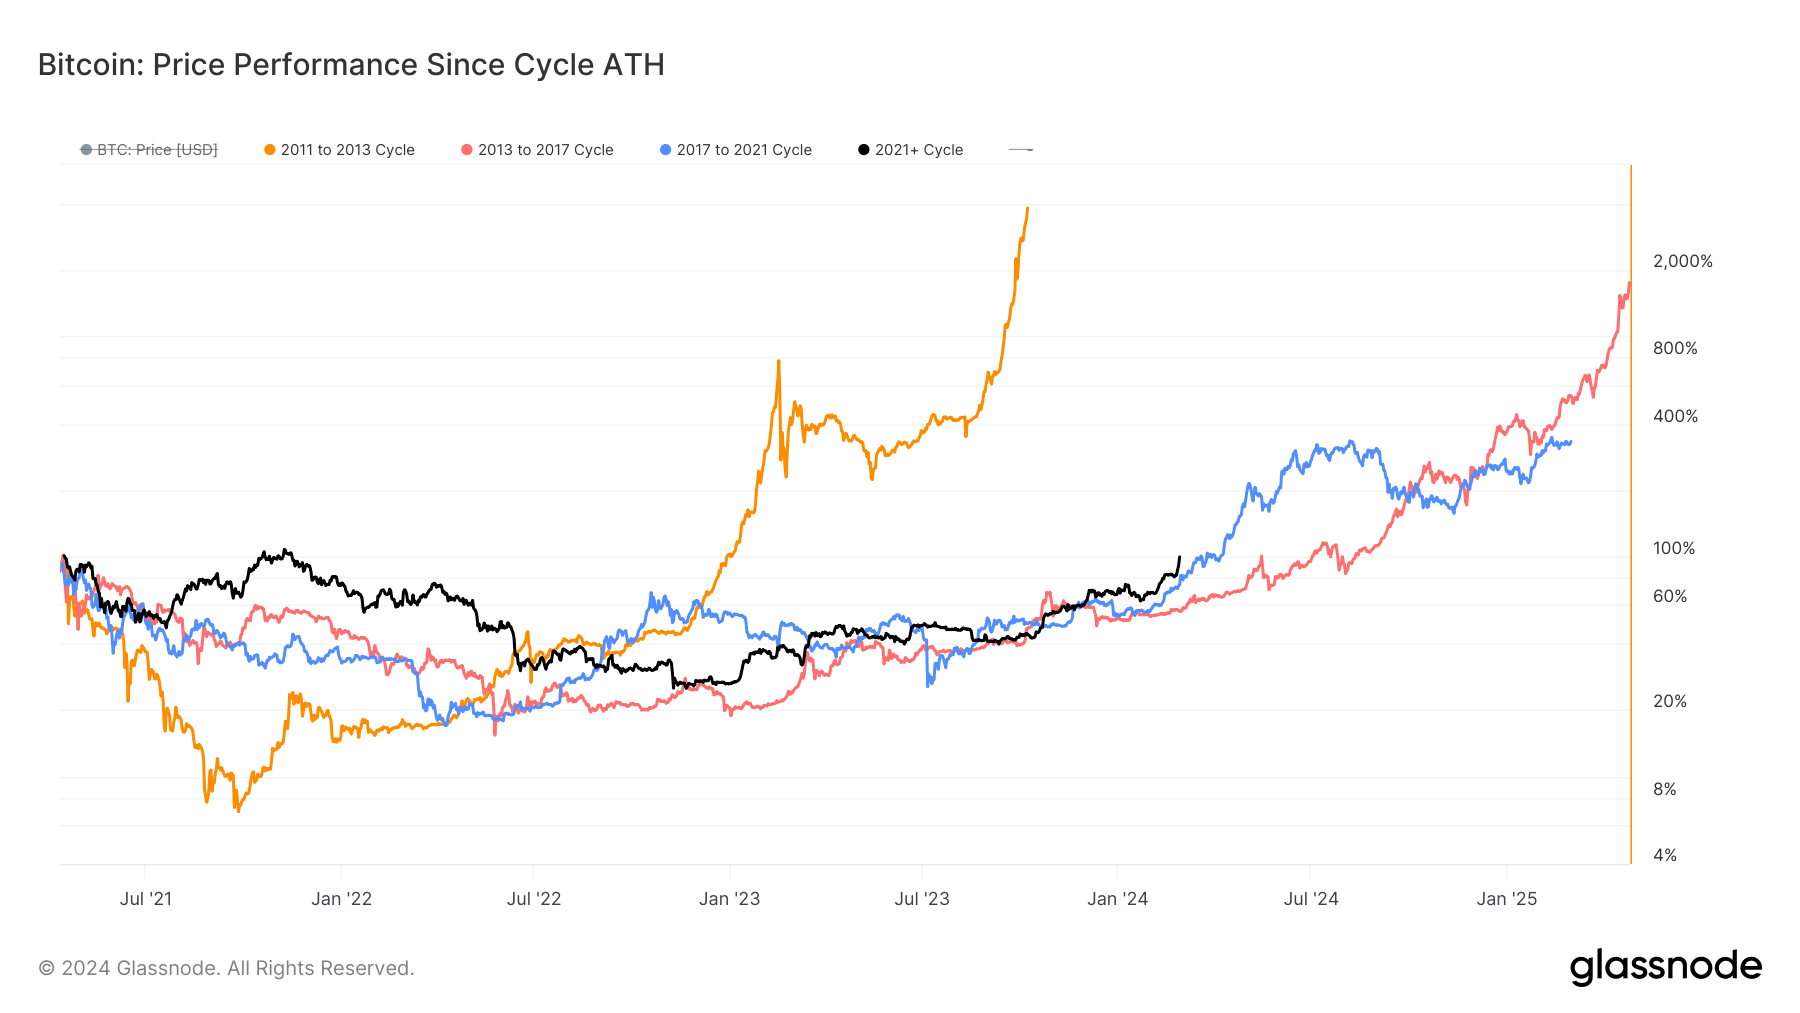 Price performance since the ATH cycle: (Source: Glassnode)